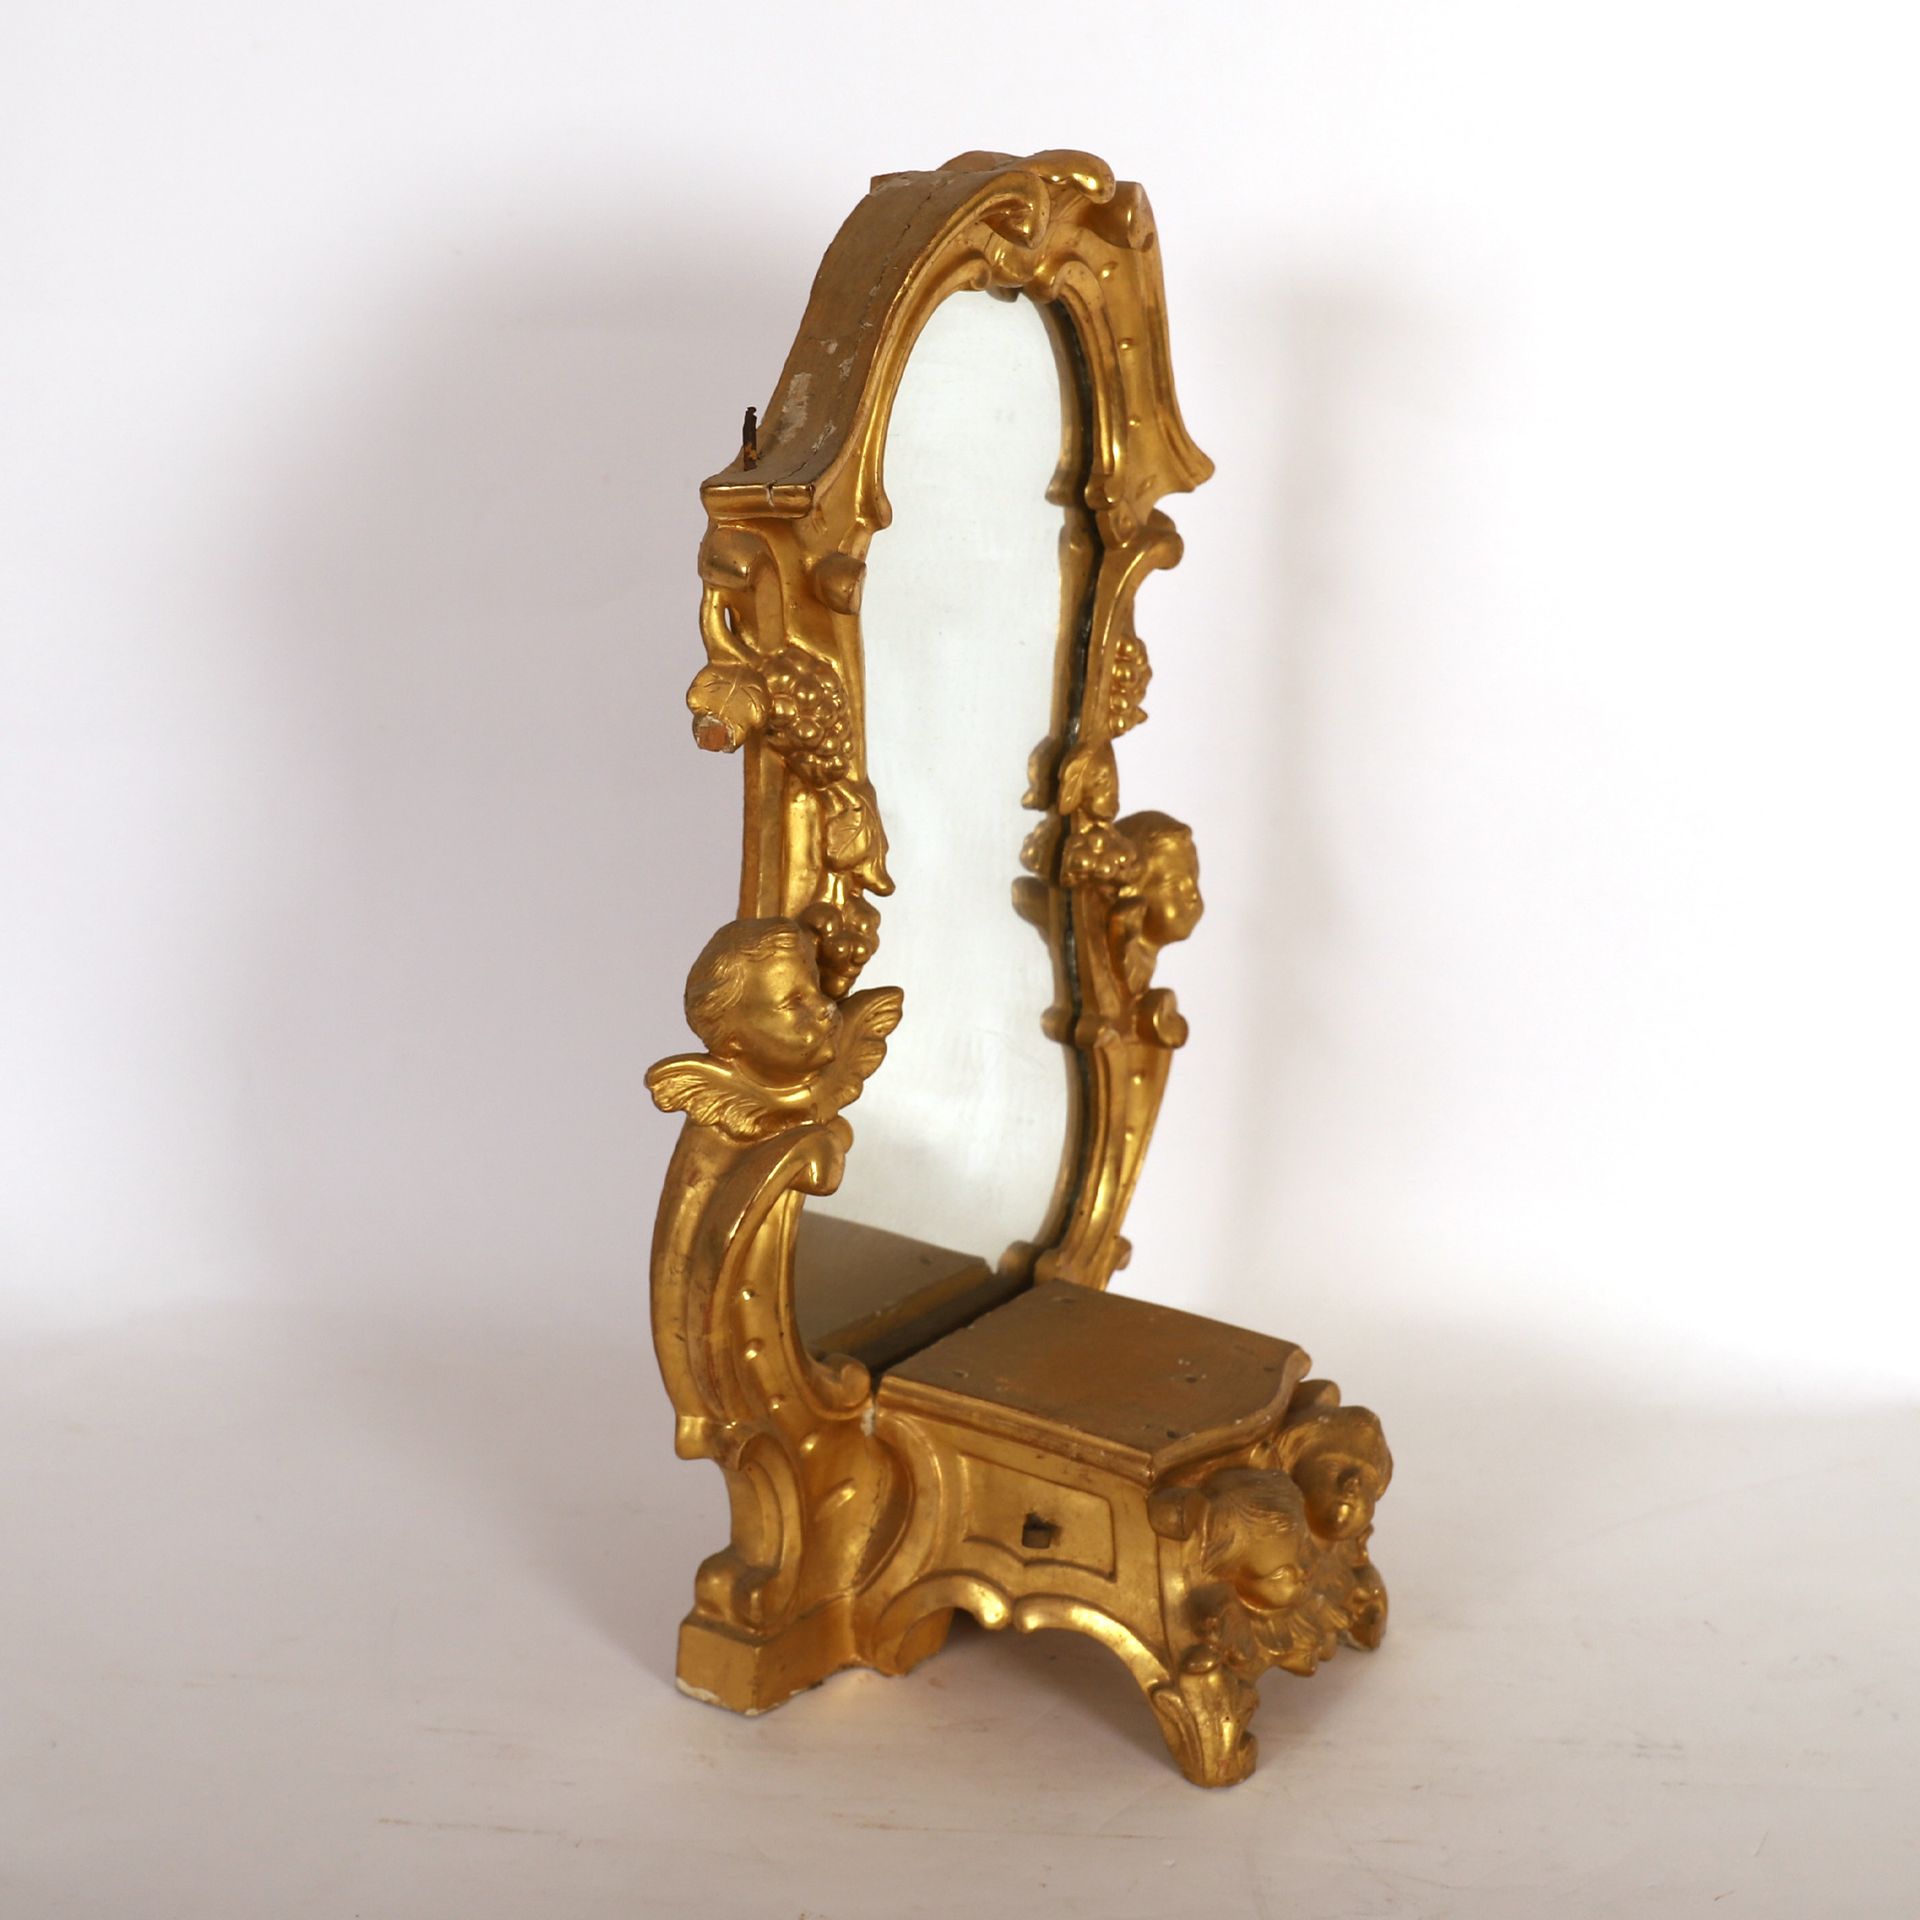 Null MIRROR DISPLAY STAND IN CARVED AND GILDED WOOD, LOUIS XIV MODEL

Decorated &hellip;